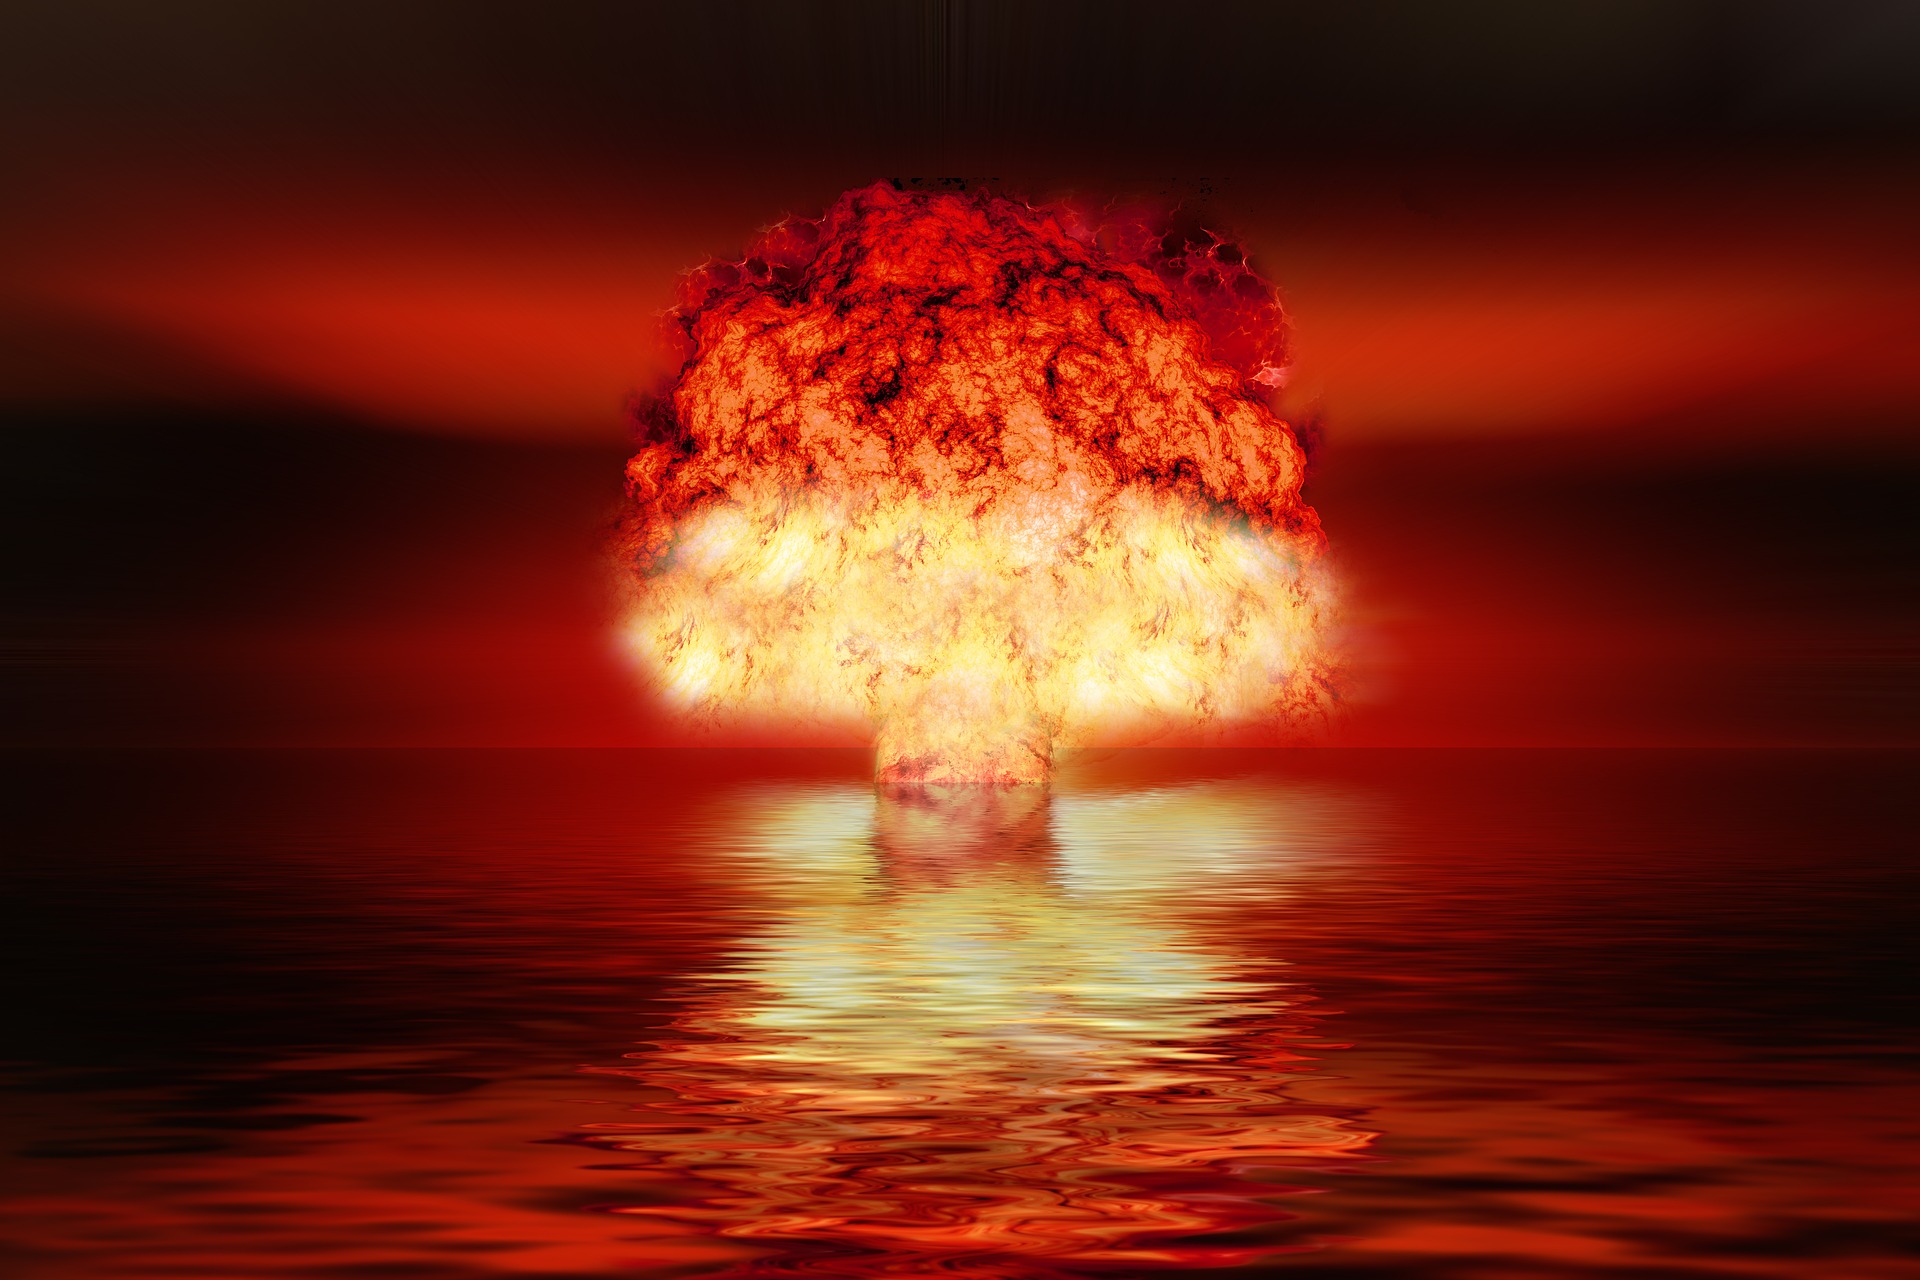 doomsday signs - nuclear bomb